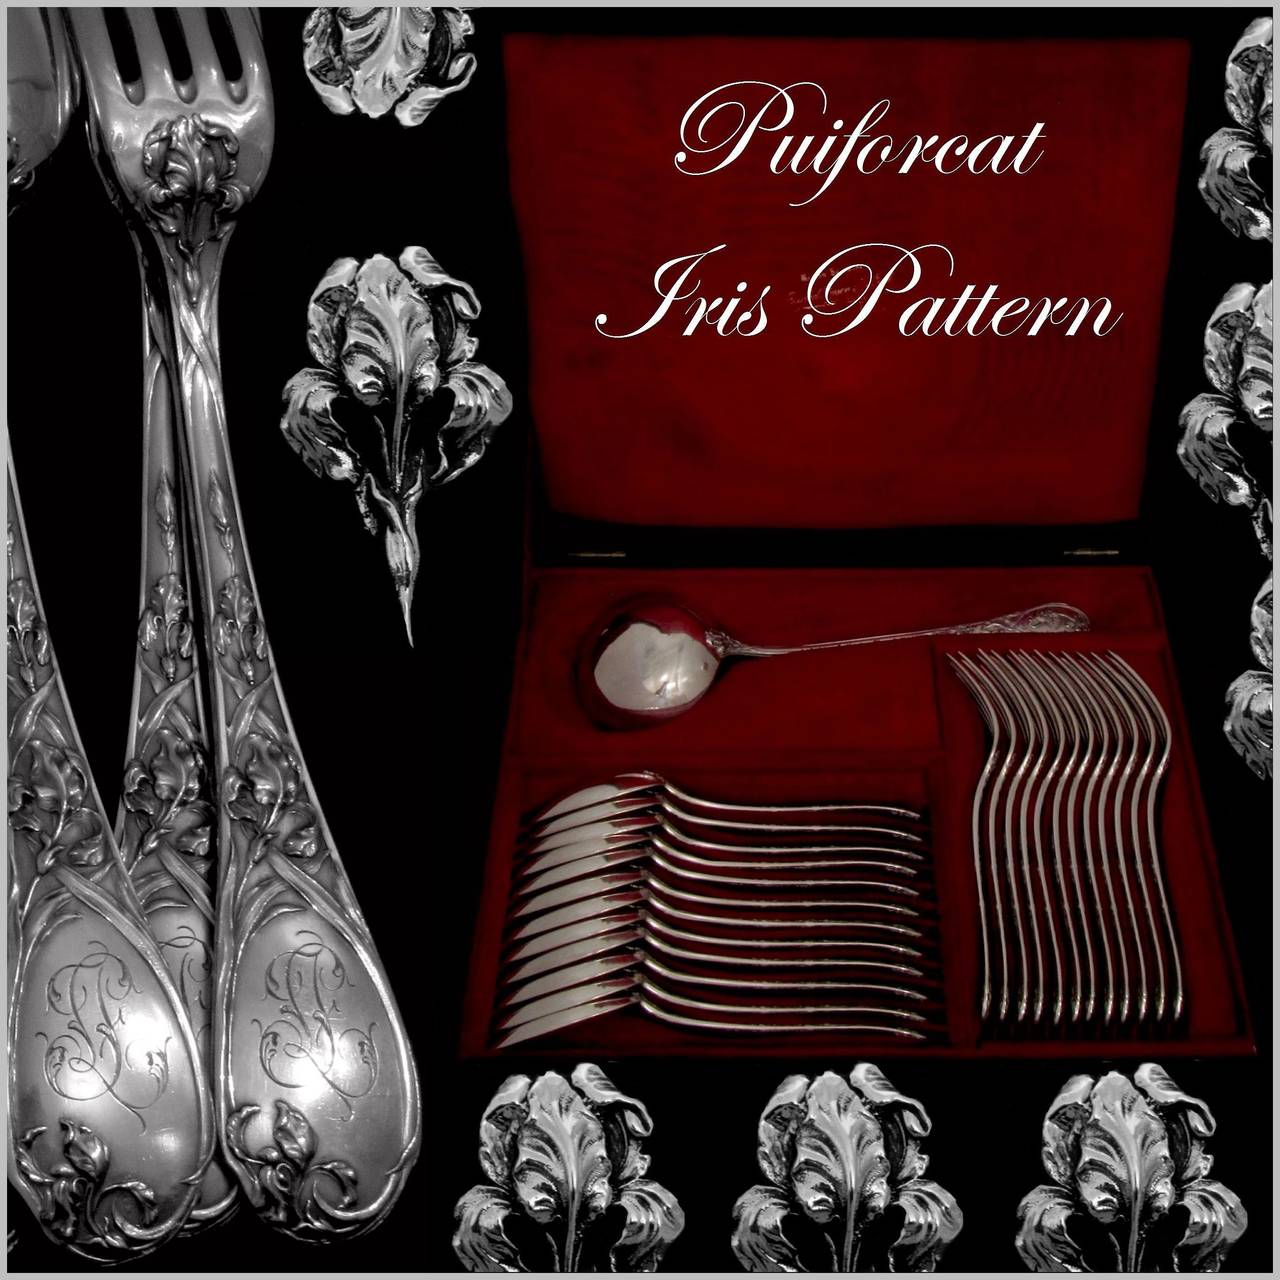 PUIFORCAT French Sterling Silver Dinner Flatware Set 25 pc Iris w/box

Head of Minerve 1 st titre for 950/1000 French Sterling Silver guarantee

The set have a fantastic Iris motif in Art Nouveau style. Finesse of design and quality of execution